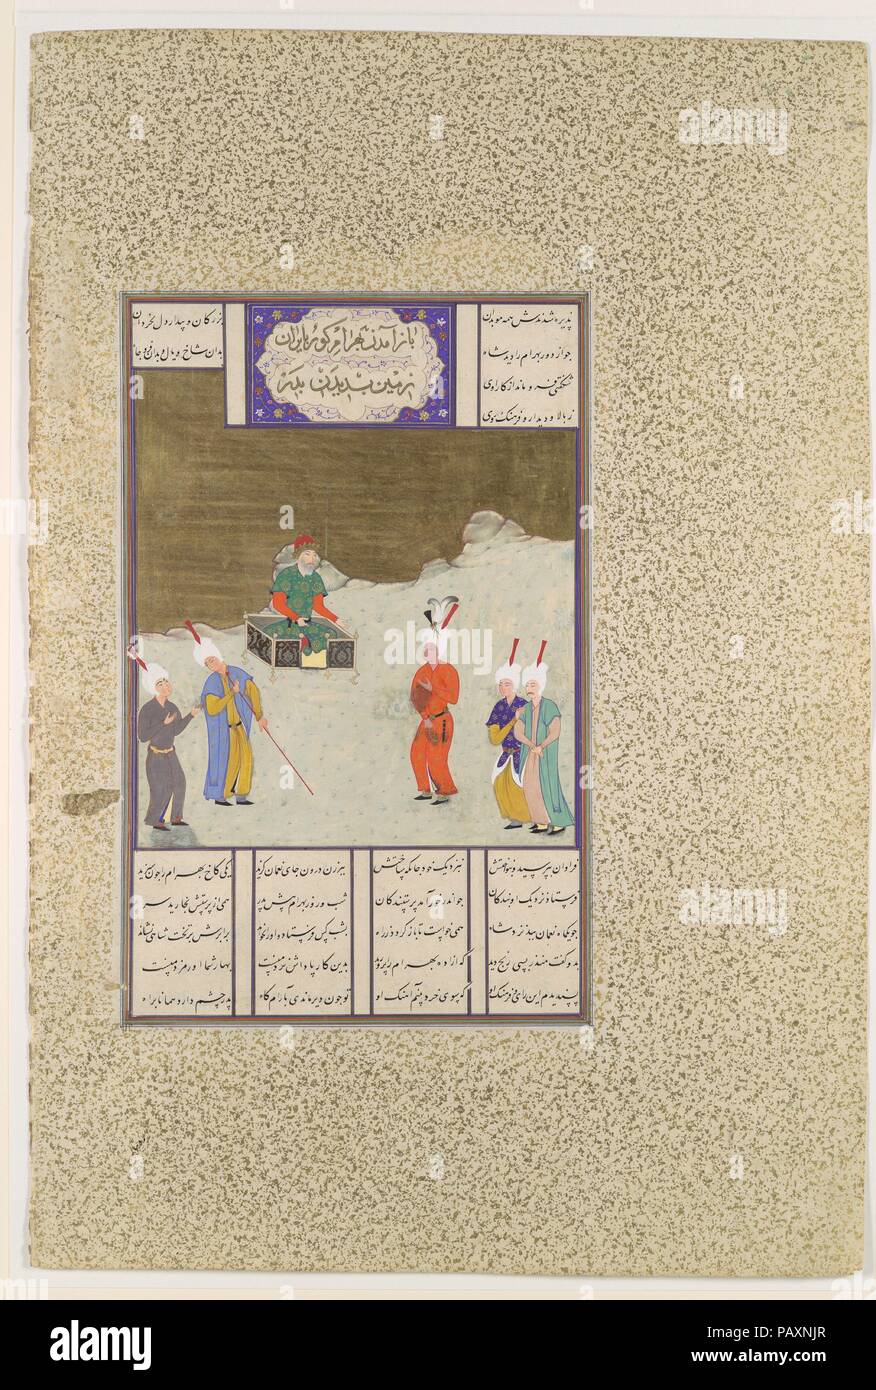 'Bahrum Gur Before His Father, Yazdigird I', Folio 551v from the Shahnama (Book of Kings) of Shah Tahmasp. Artist: Painting attributed to Dust Muhammad. Author: Abu'l Qasim Firdausi (935-1020). Dimensions: Painting: H. 7 3/16 x W. 6 11/16 in. (H. 18.2 x W. 17 cm)  Entire Page: H. 18 5/8 x W. 12 5/8 in. (H. 47.3 x W. 32.1 cm). Date: ca. 1530-35.  Munzir, Bahram's Arab host, sends a painting of him to his father,Yazdigird I, who is so struck by his son's handsome physique and hunting prowess that he asks Munzir to send him to Iran. Bahram arrives and greatly impresses his father with his manly a Stock Photo